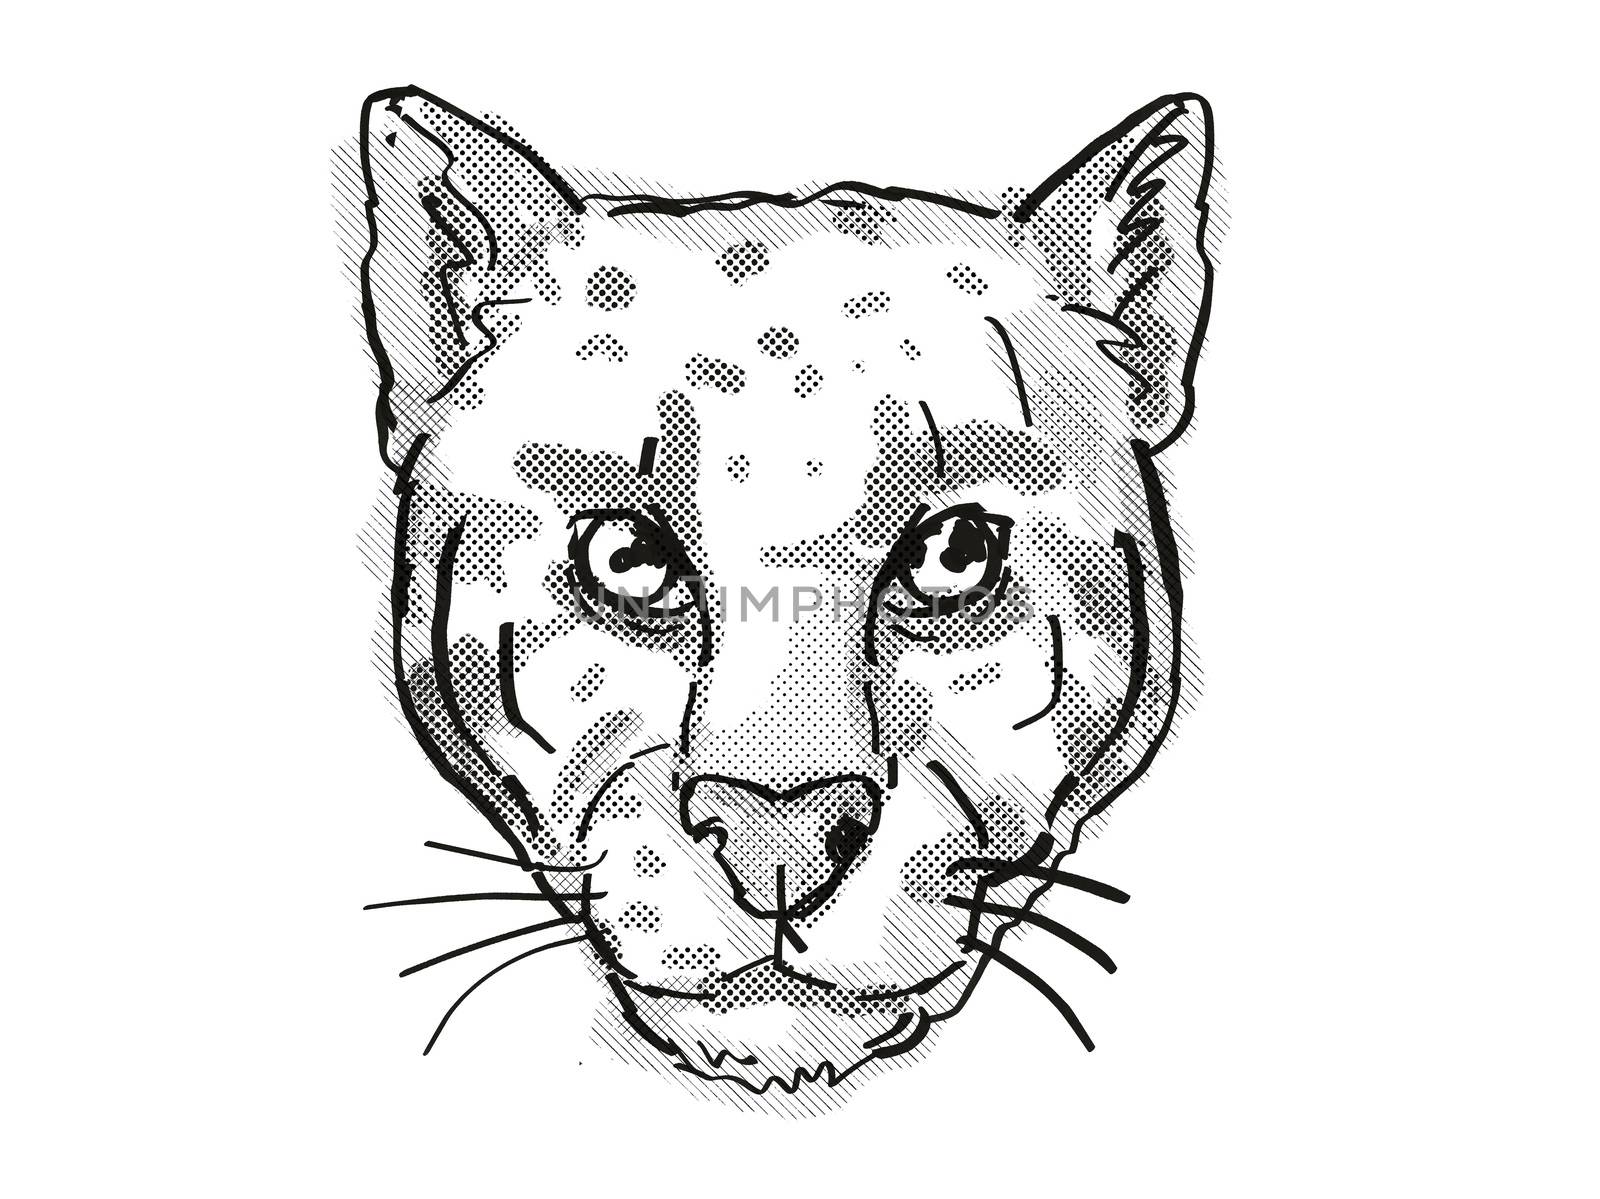 Retro cartoon style drawing of head of a Clouded Leopard or Neofelis nebulosa , an endangered wildlife species on isolated white background done in black and white.